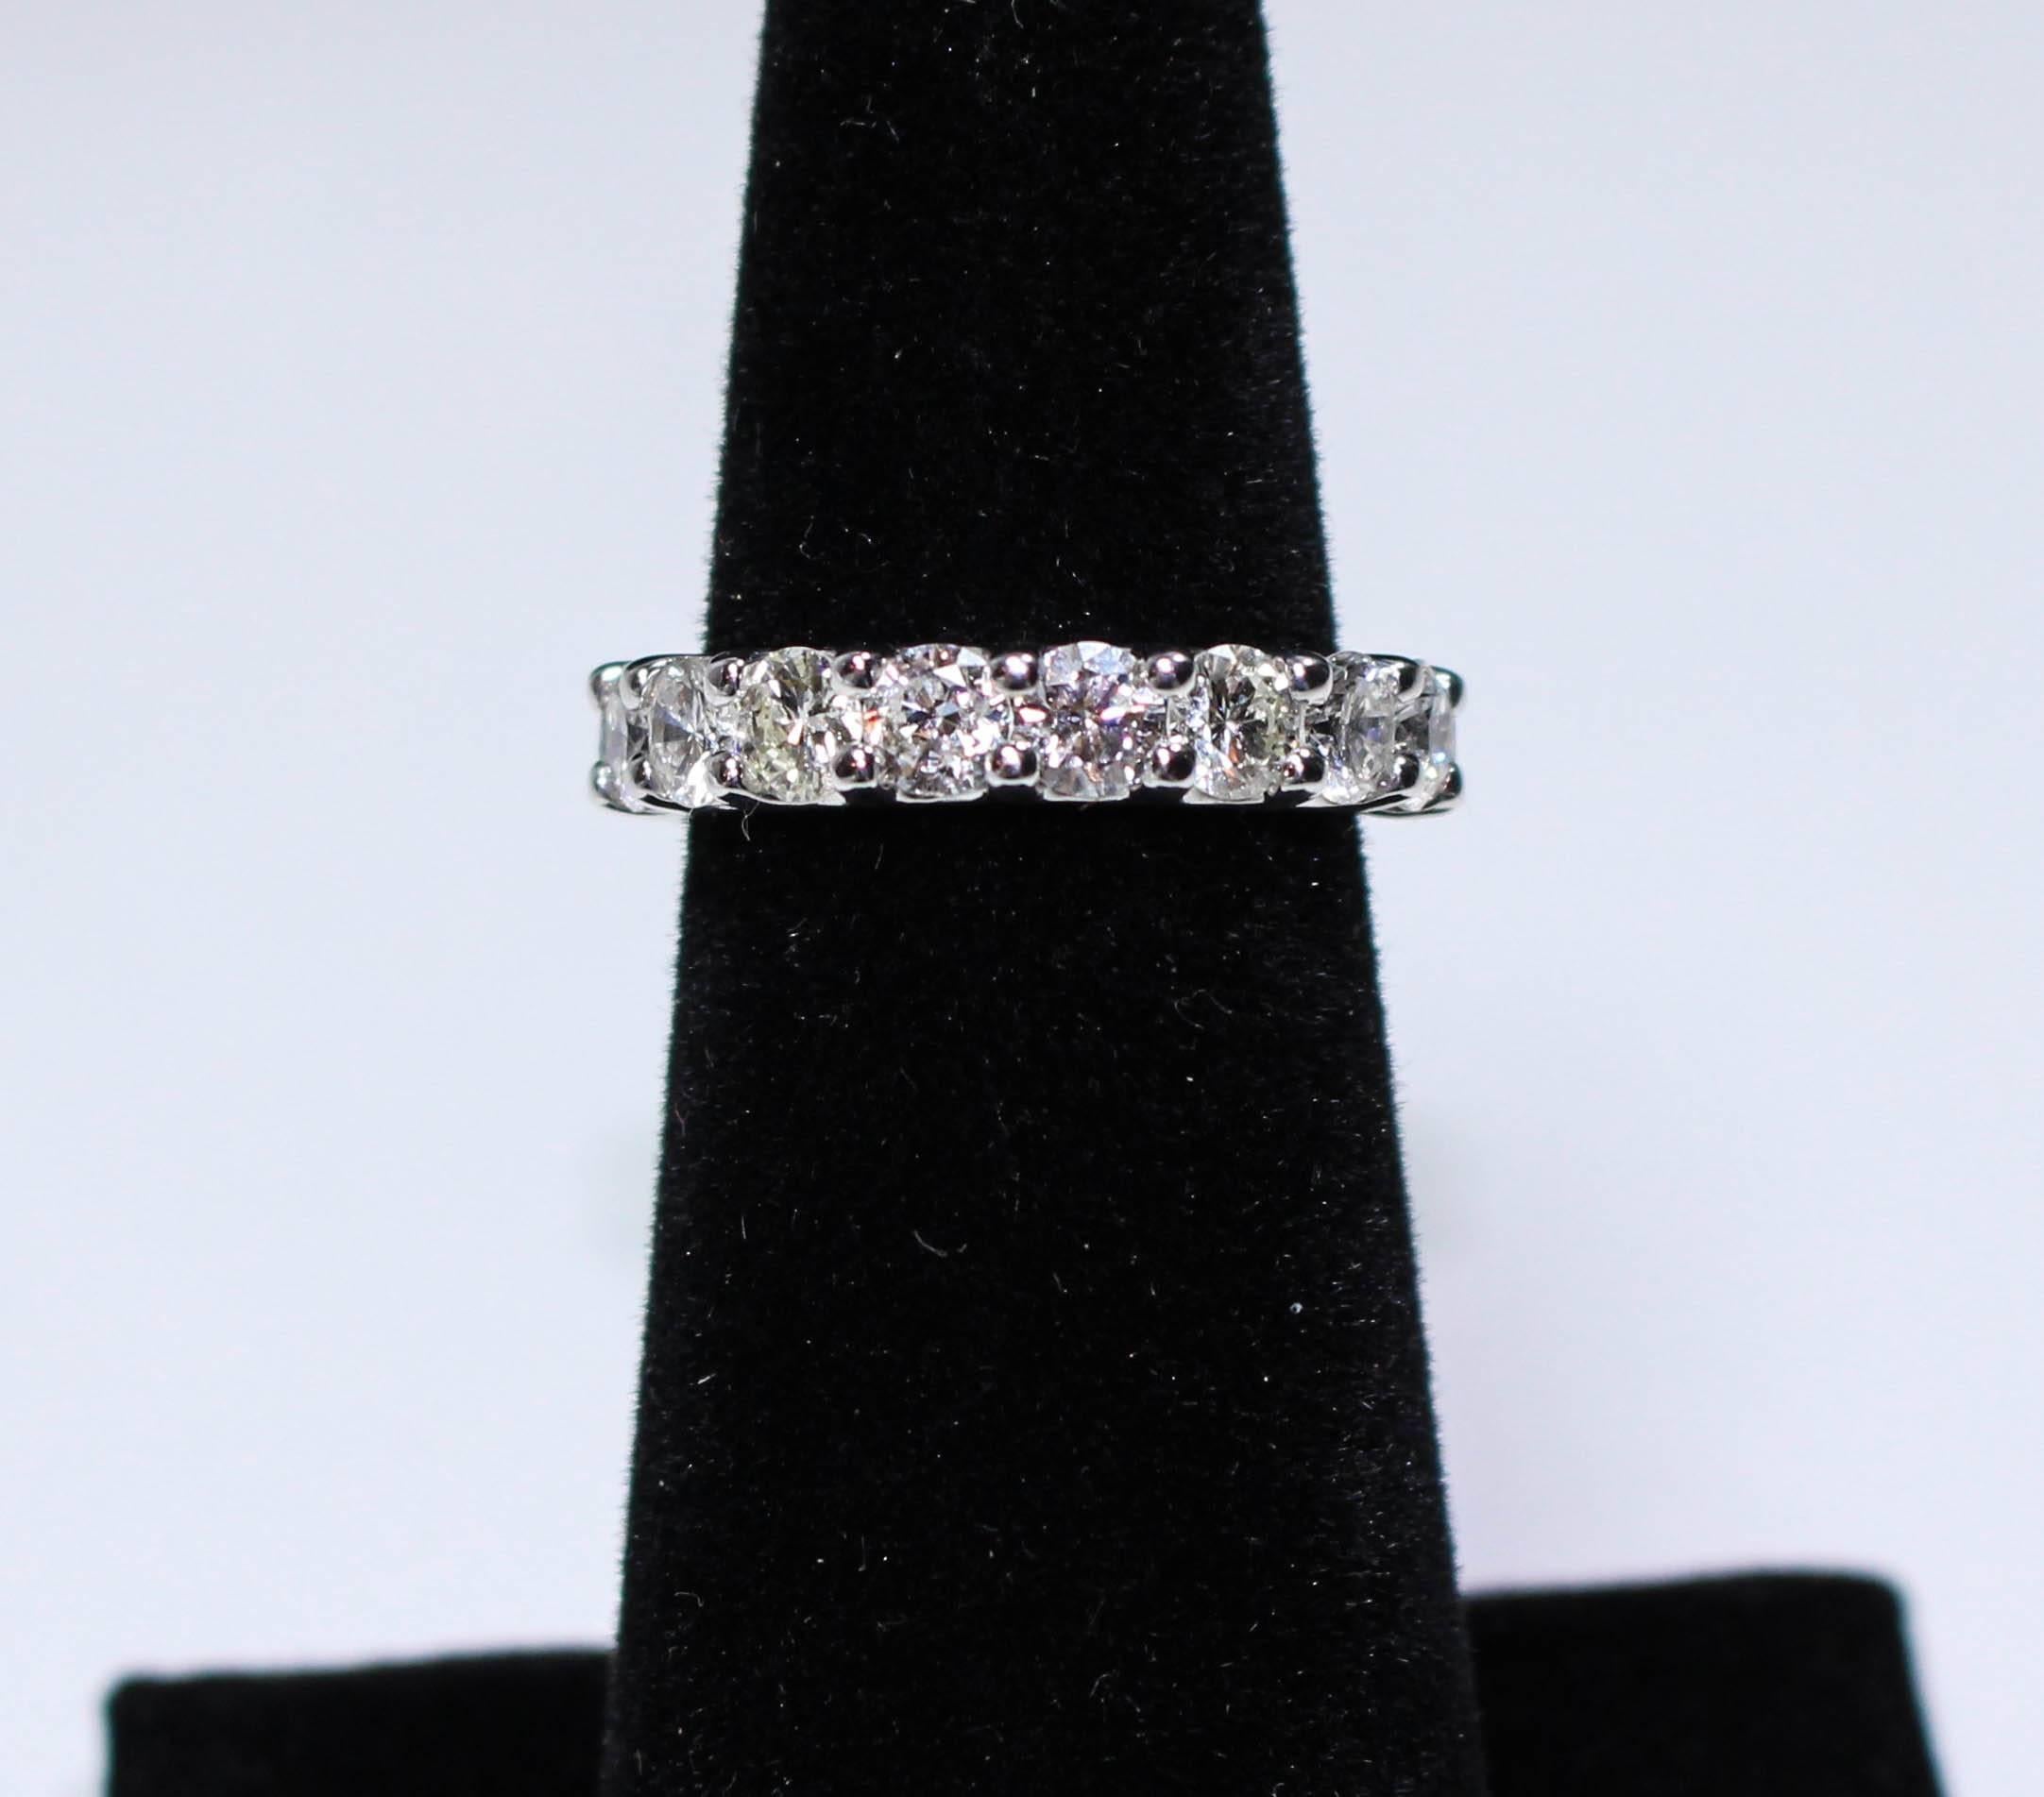 This eternity band is composed of white gold with 17 stunning HS1 round cut diamonds with an approximate total weight of 4.04 Carats (each stone is approximately .20 carats and 3.8 mm in size). This ring is not sizable. 

Please feel free to ask any